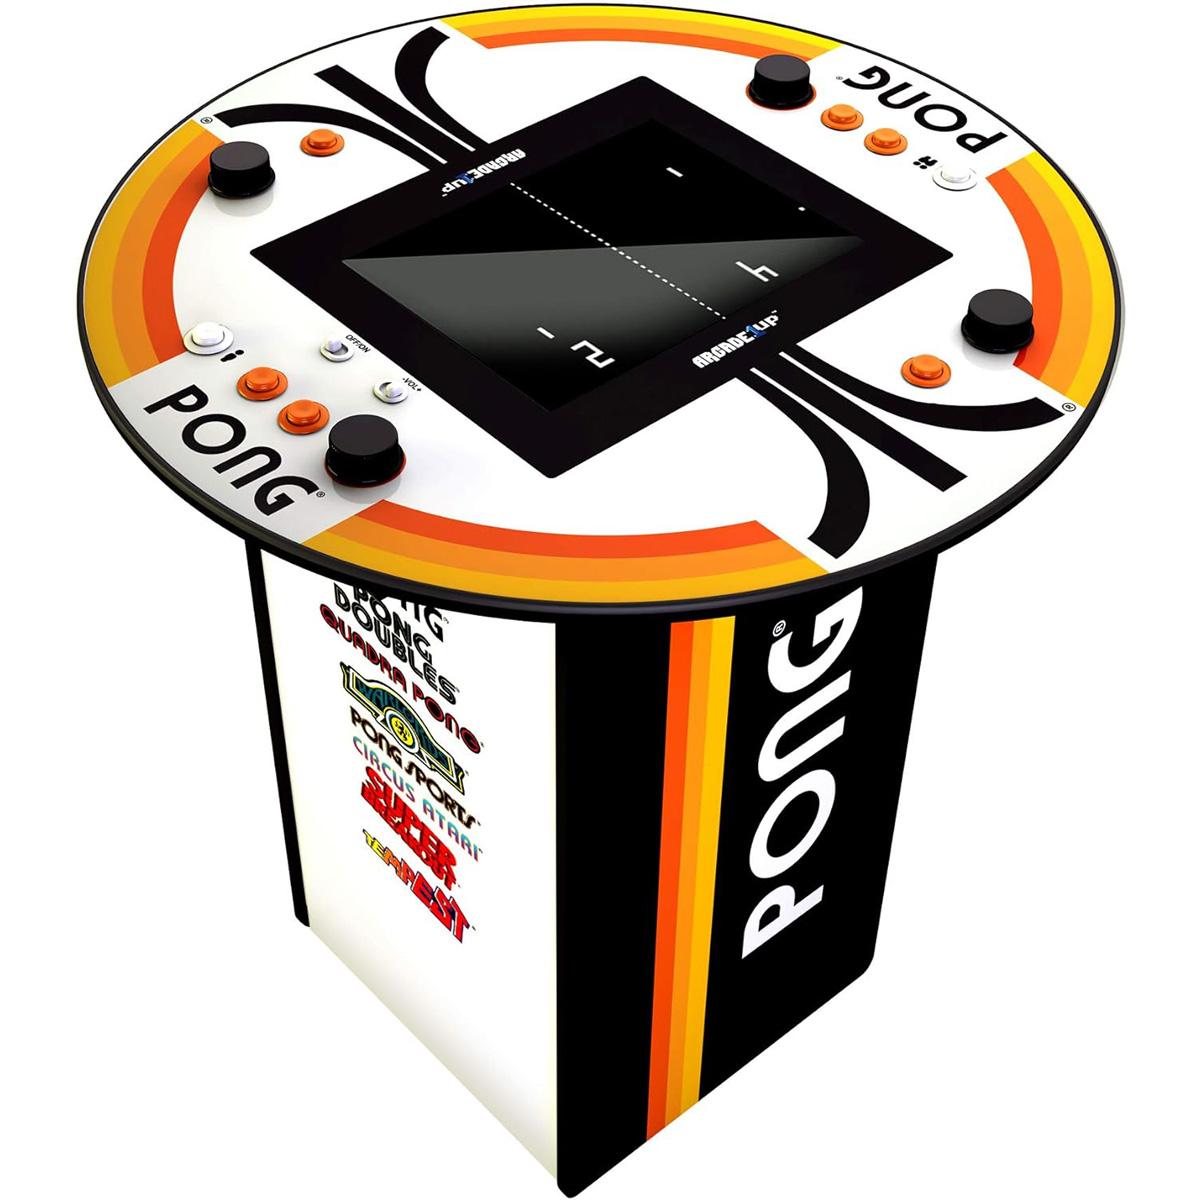 Arcade1Up Pong 4 Player Pub Table for $299.99 Shipped